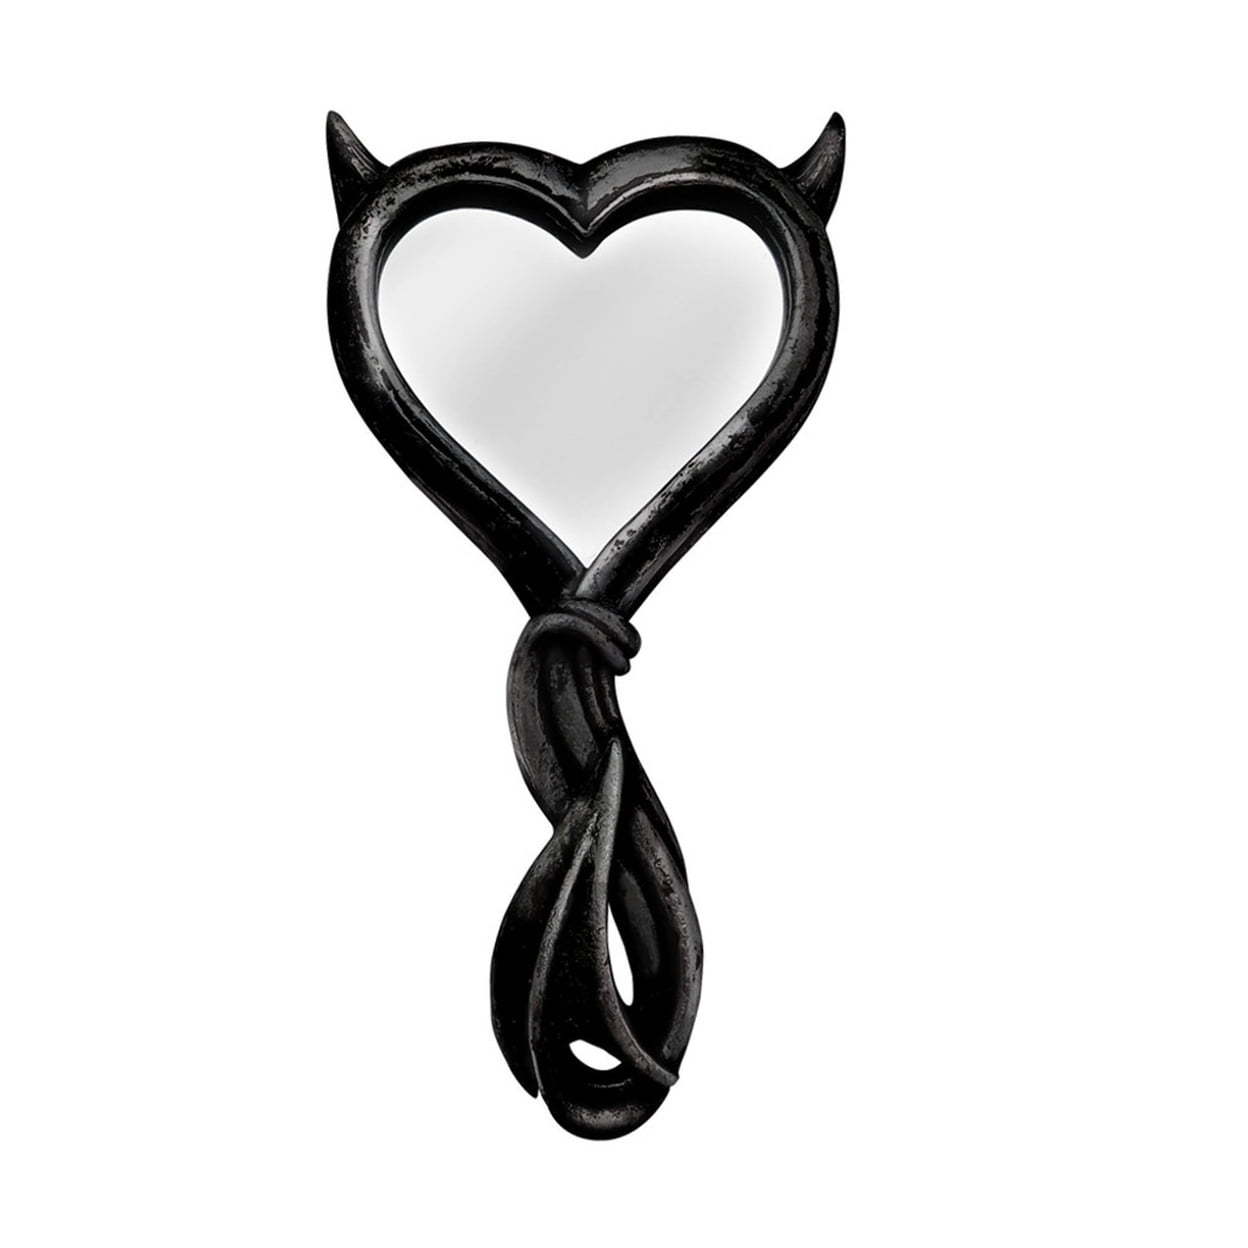 Picture of Alchemy Gothic V80B 9.06 in. Devils Heart Mirror, Black